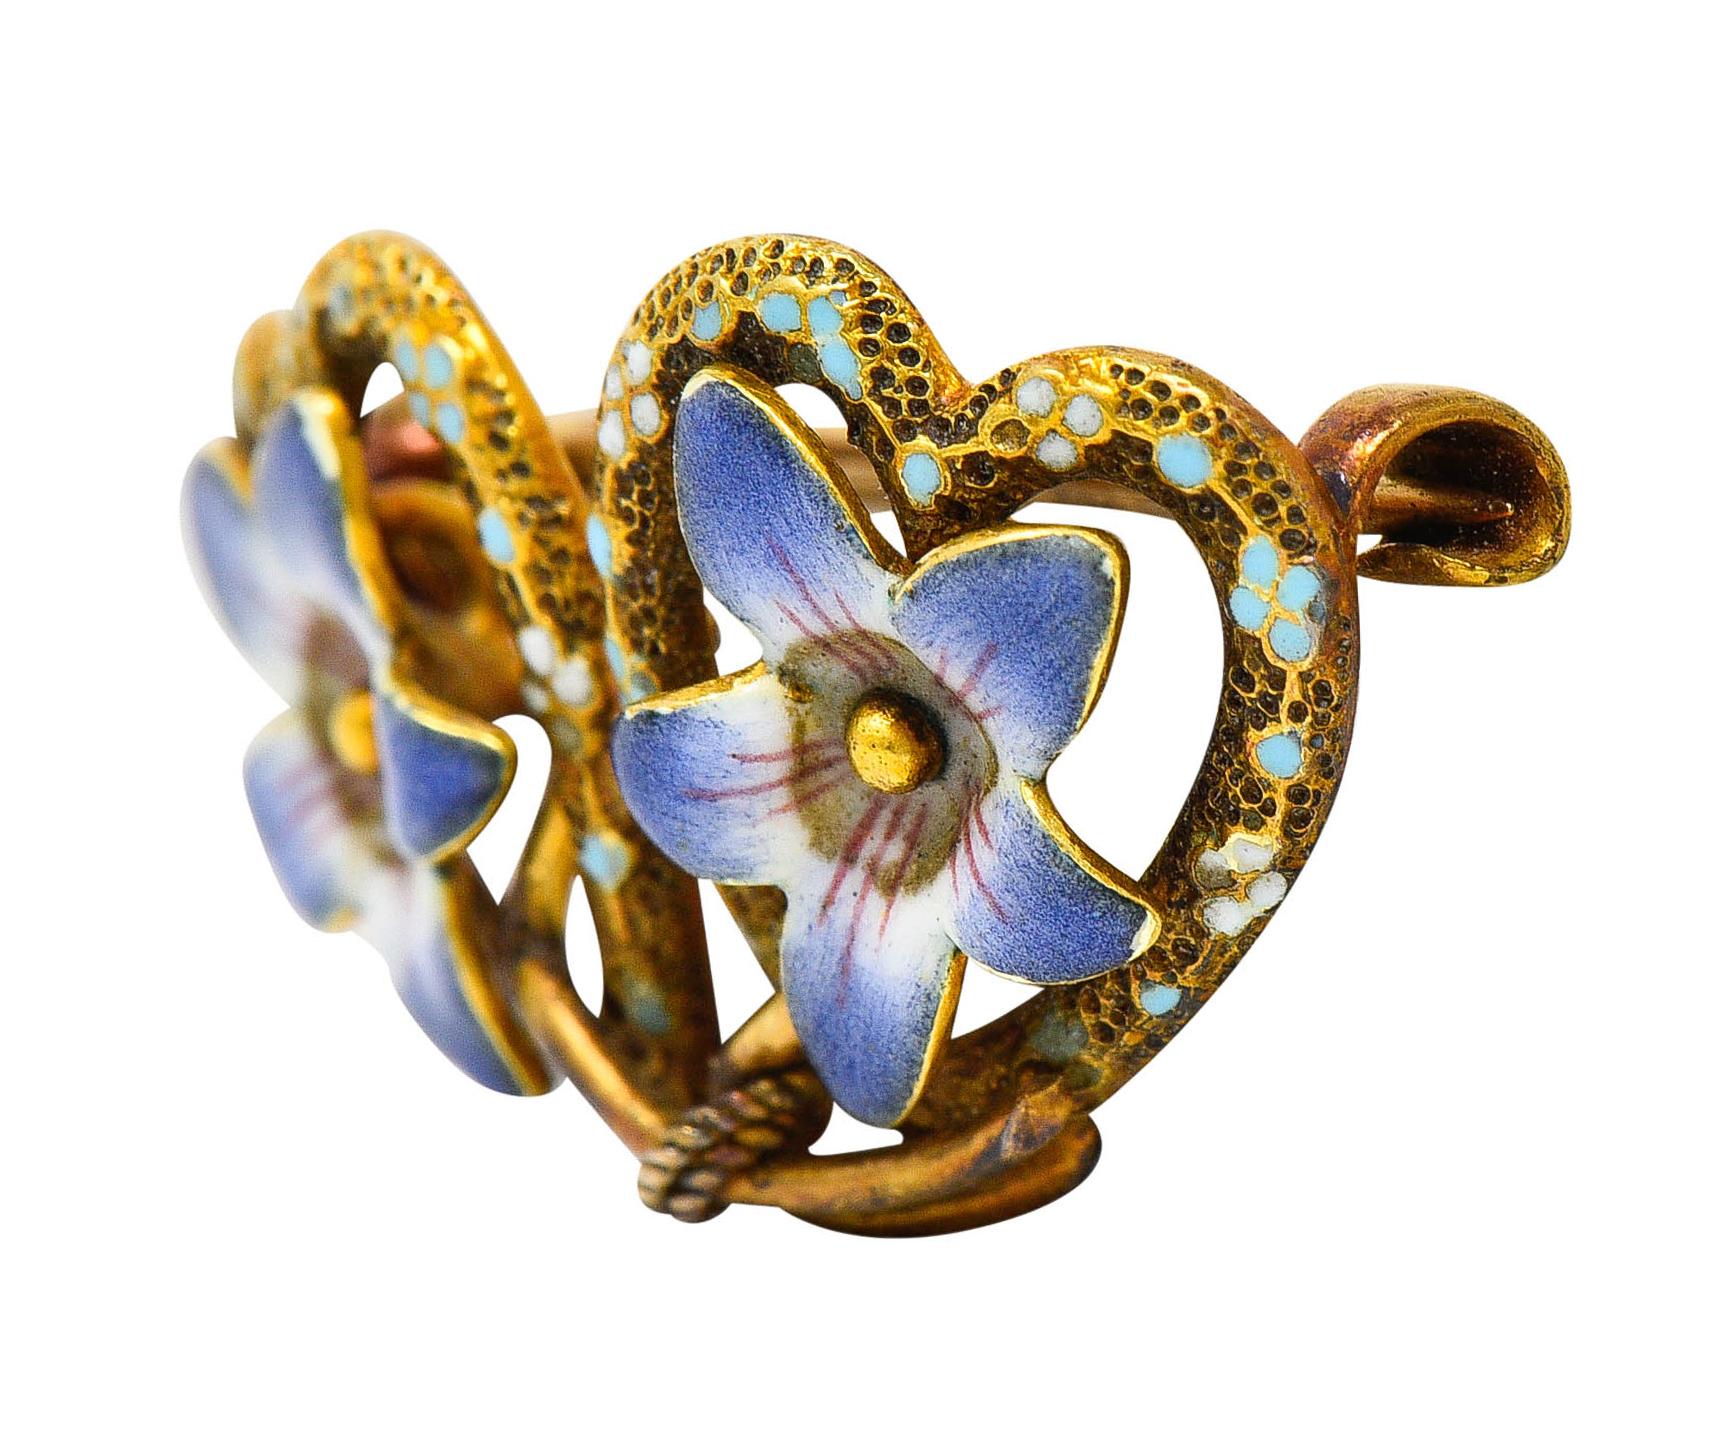 Petite brooch is designed as two hearts with bloomed and intertwined flowers

Flowers are glossed with bright lavender enamel - exhibiting no loss

Hearts are texturous with pastel enamel accents throughout

Completed by a pin stem with